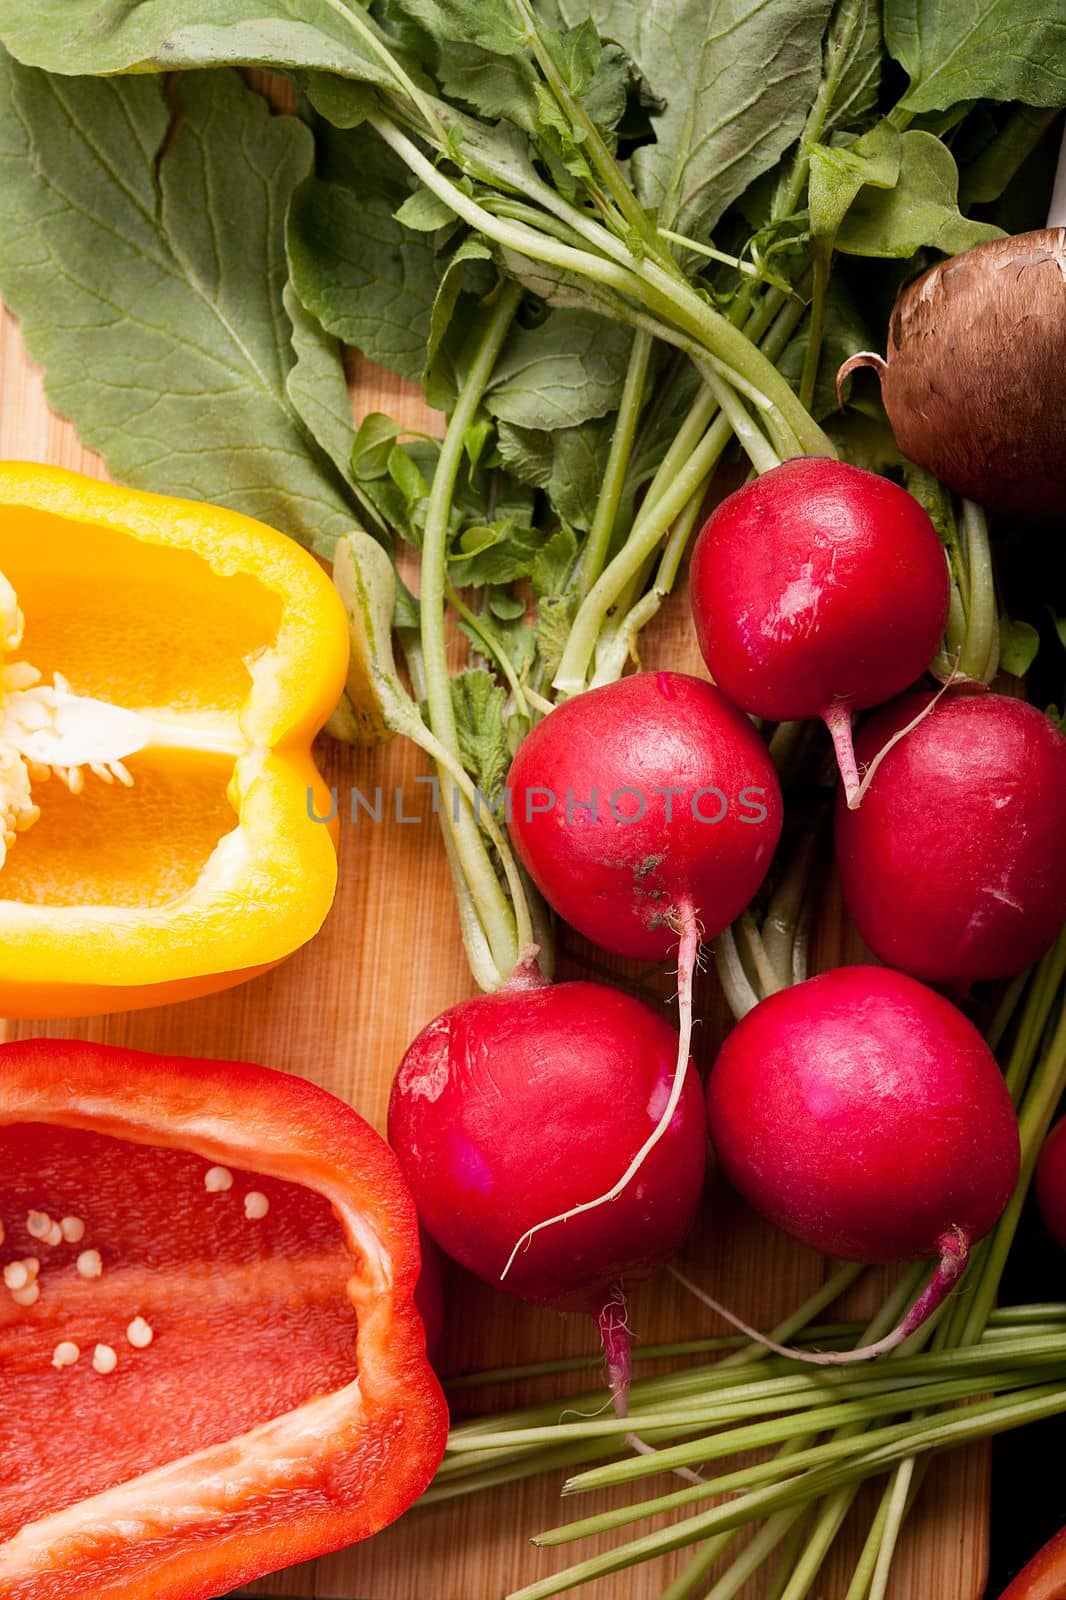 Healthy lifestyle concept image with different vegetables lying on the table